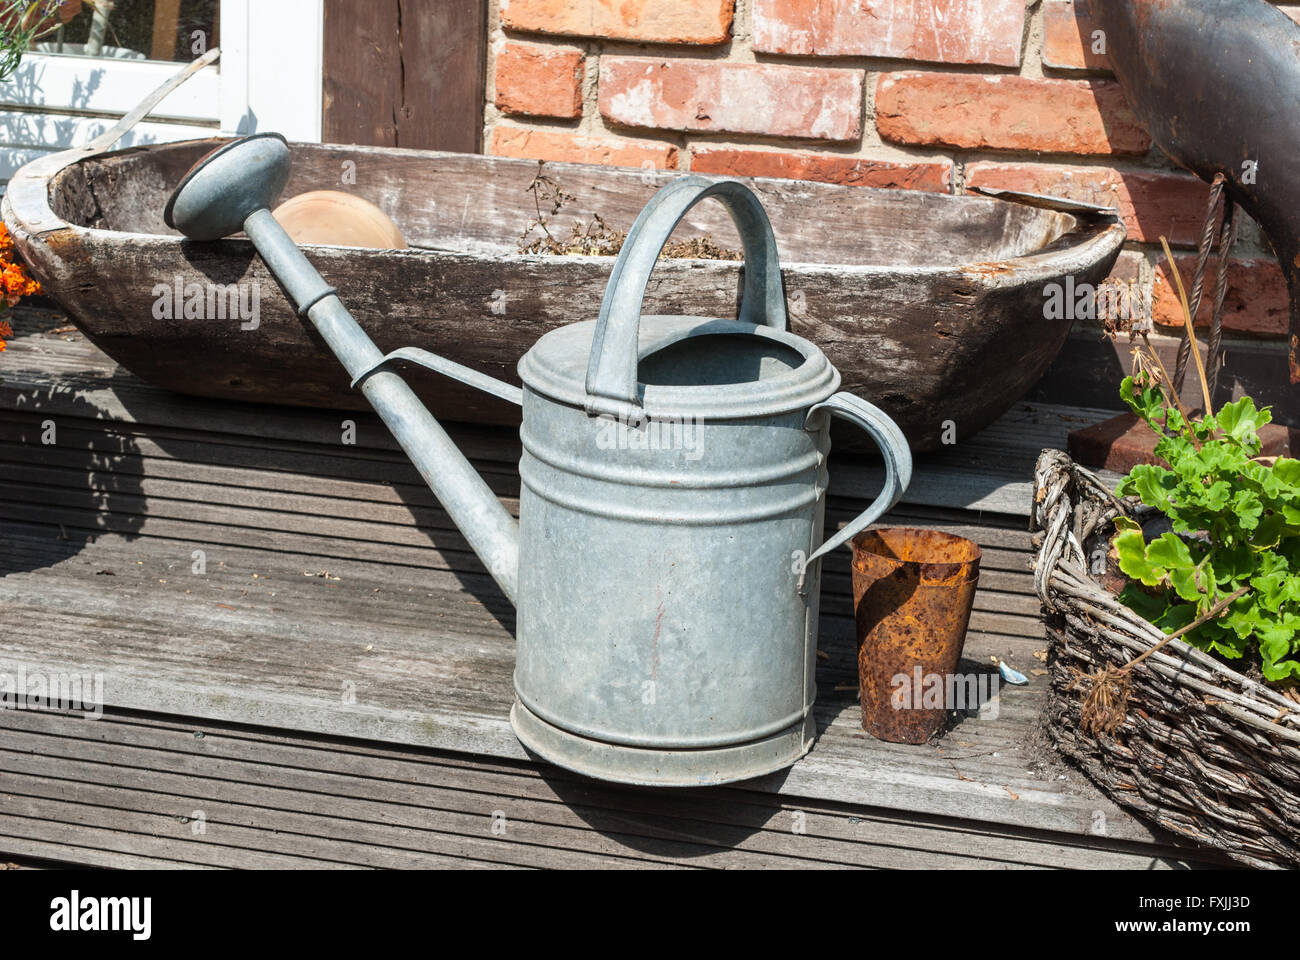 Old watering can and wooden kneading-trough as decoration in front of a house Stock Photo